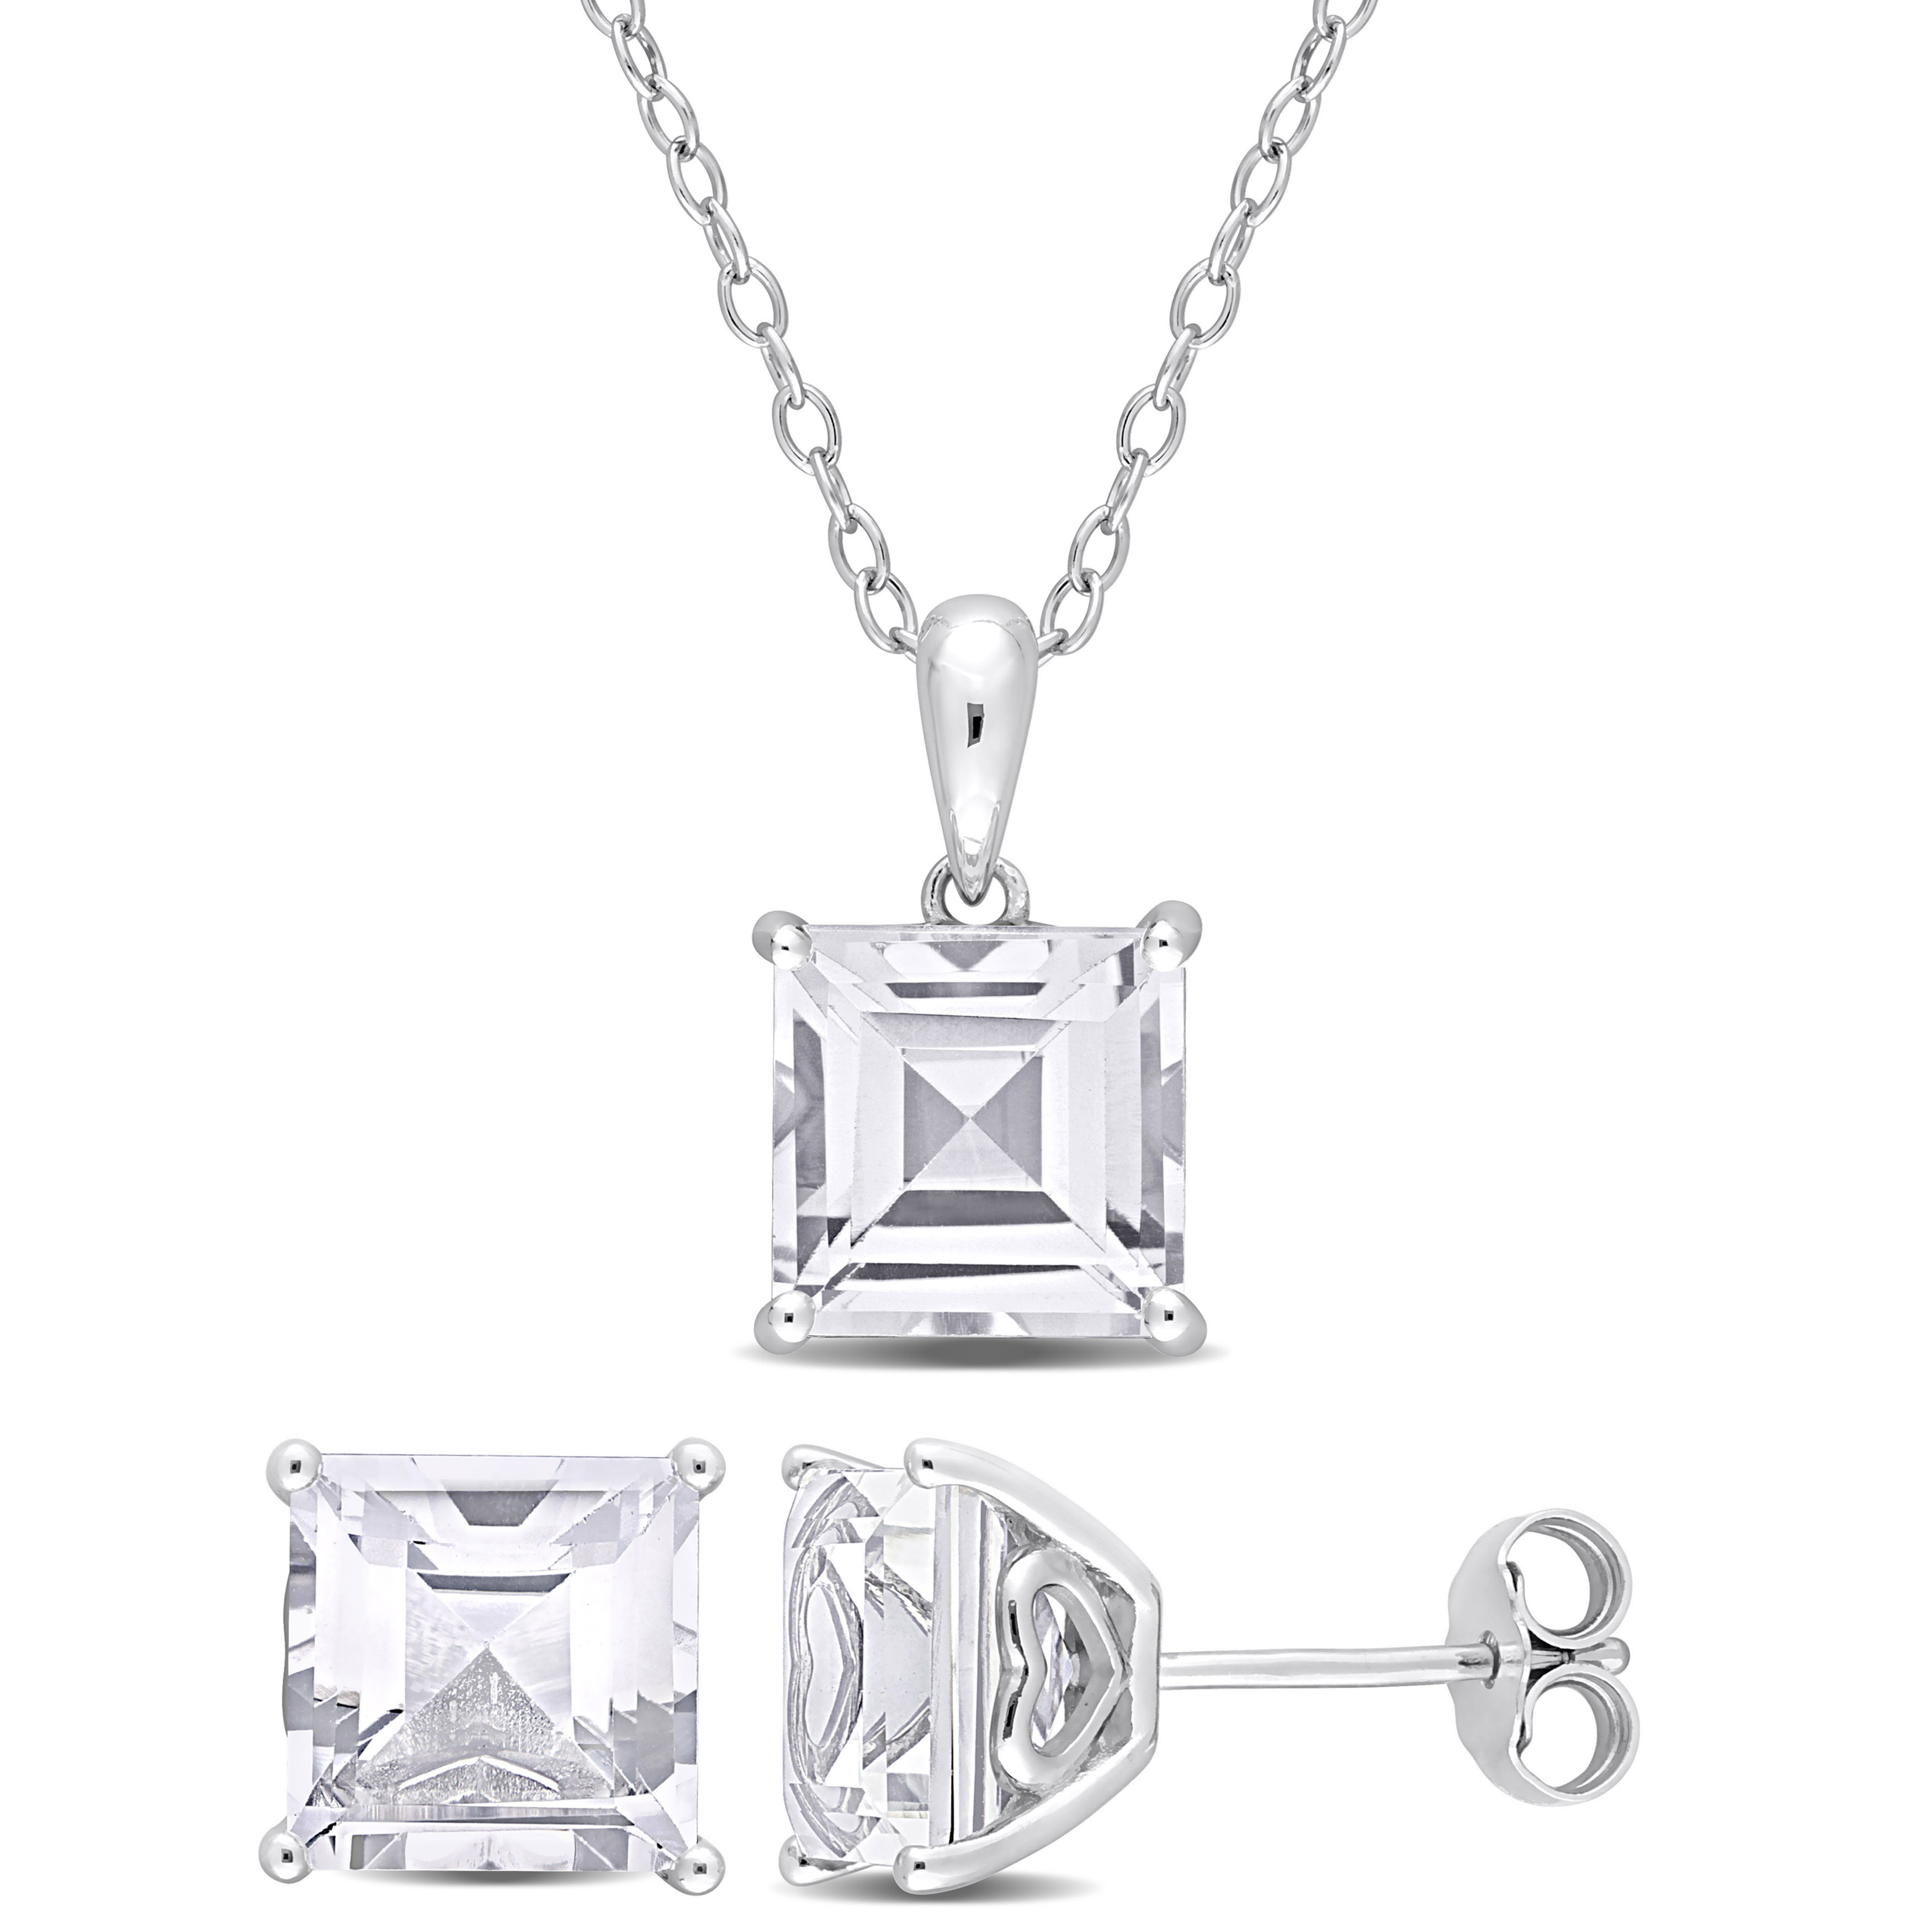 9 CT TGW Square White Topaz 2-Piece Set of Pendant with Chain and Earrings in Sterling Silver